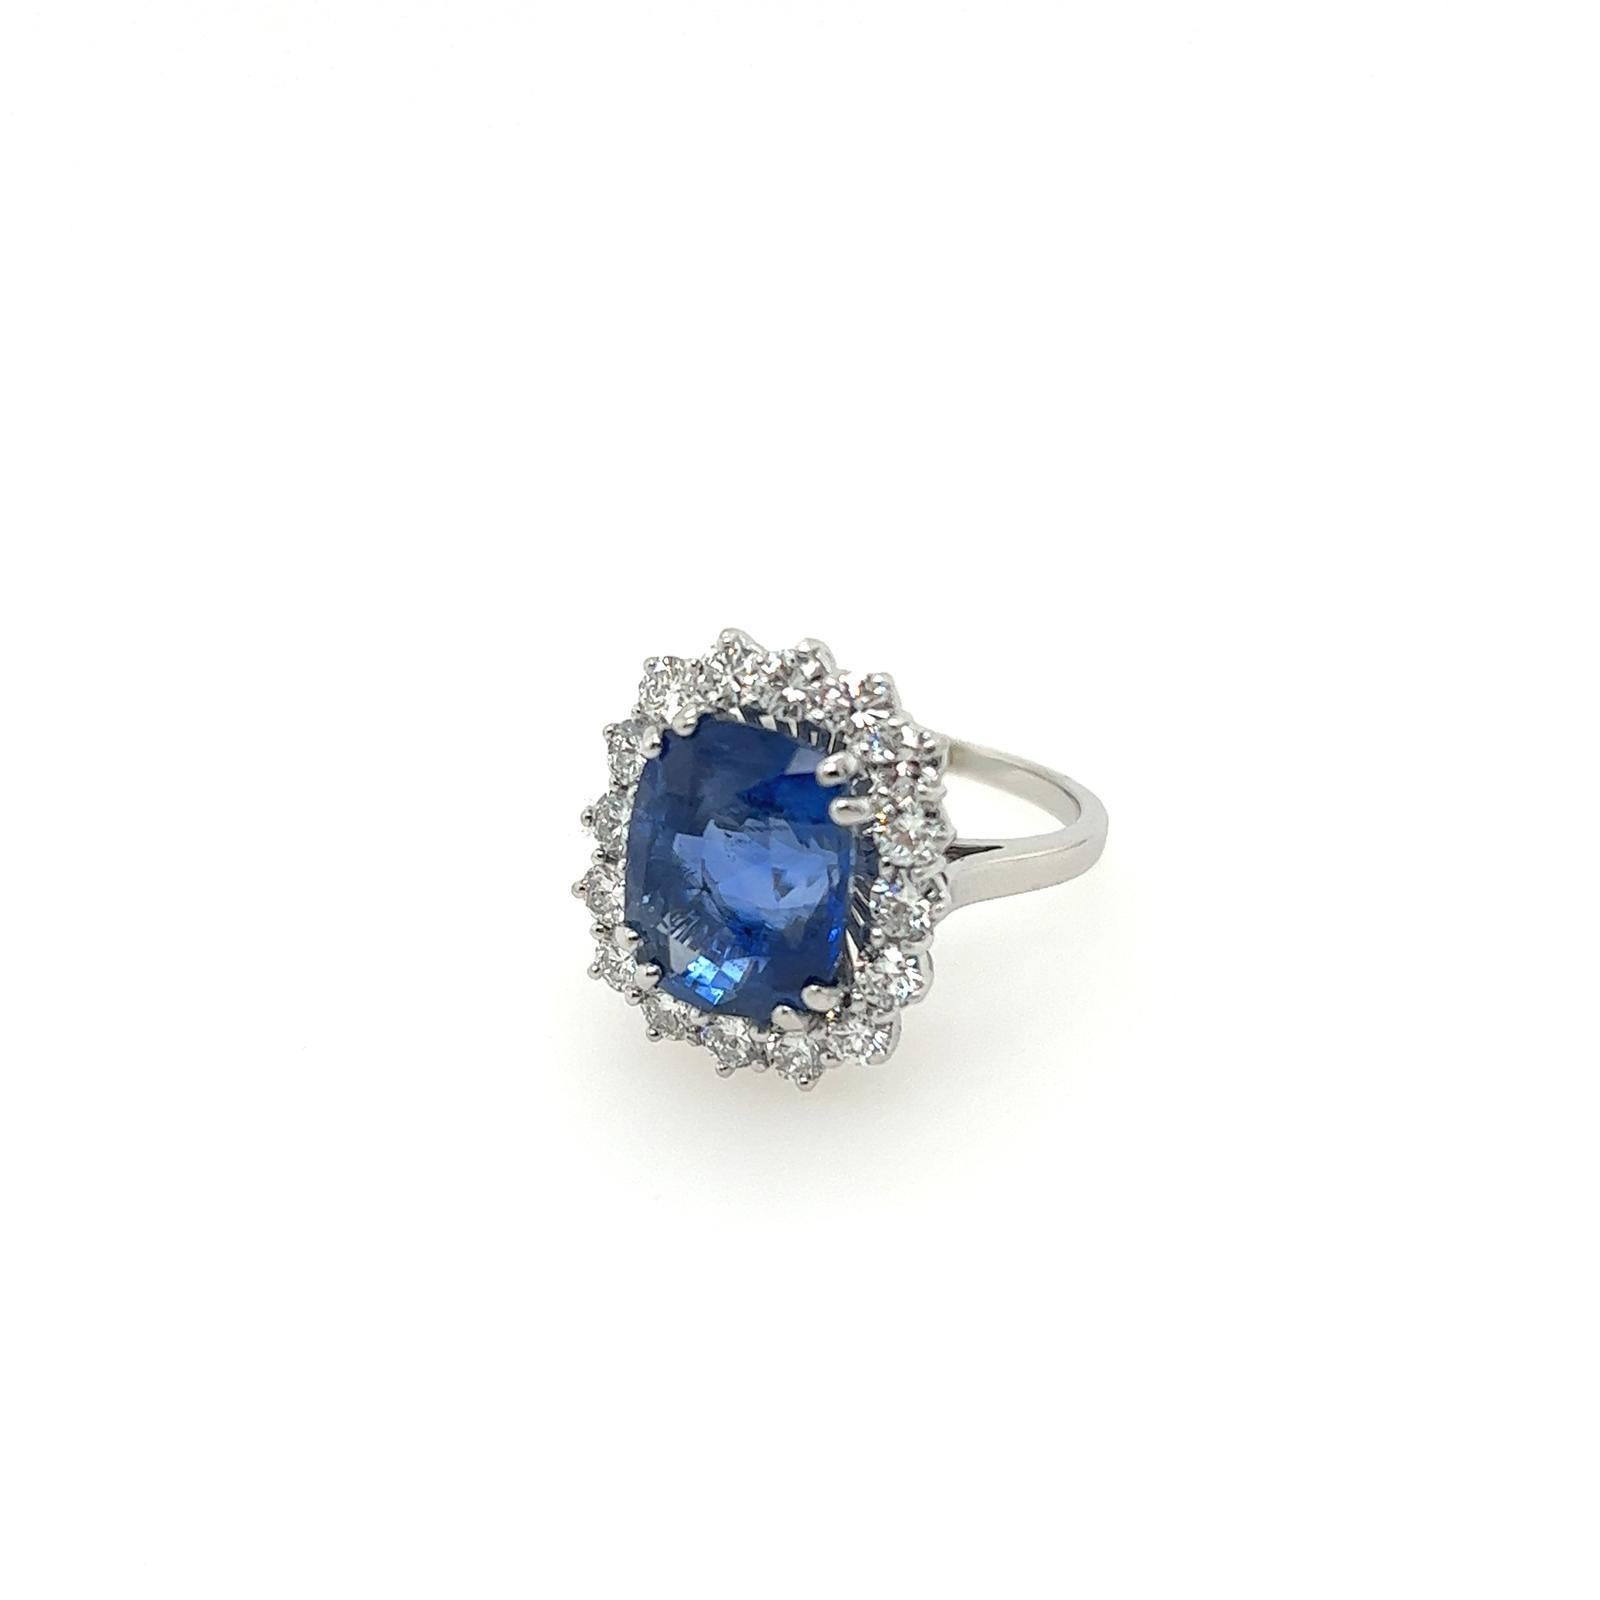 GCS Certified 8.57 Carat Ceylon Sapphire and Diamond Ring in 18K White Gold In New Condition For Sale In London, GB